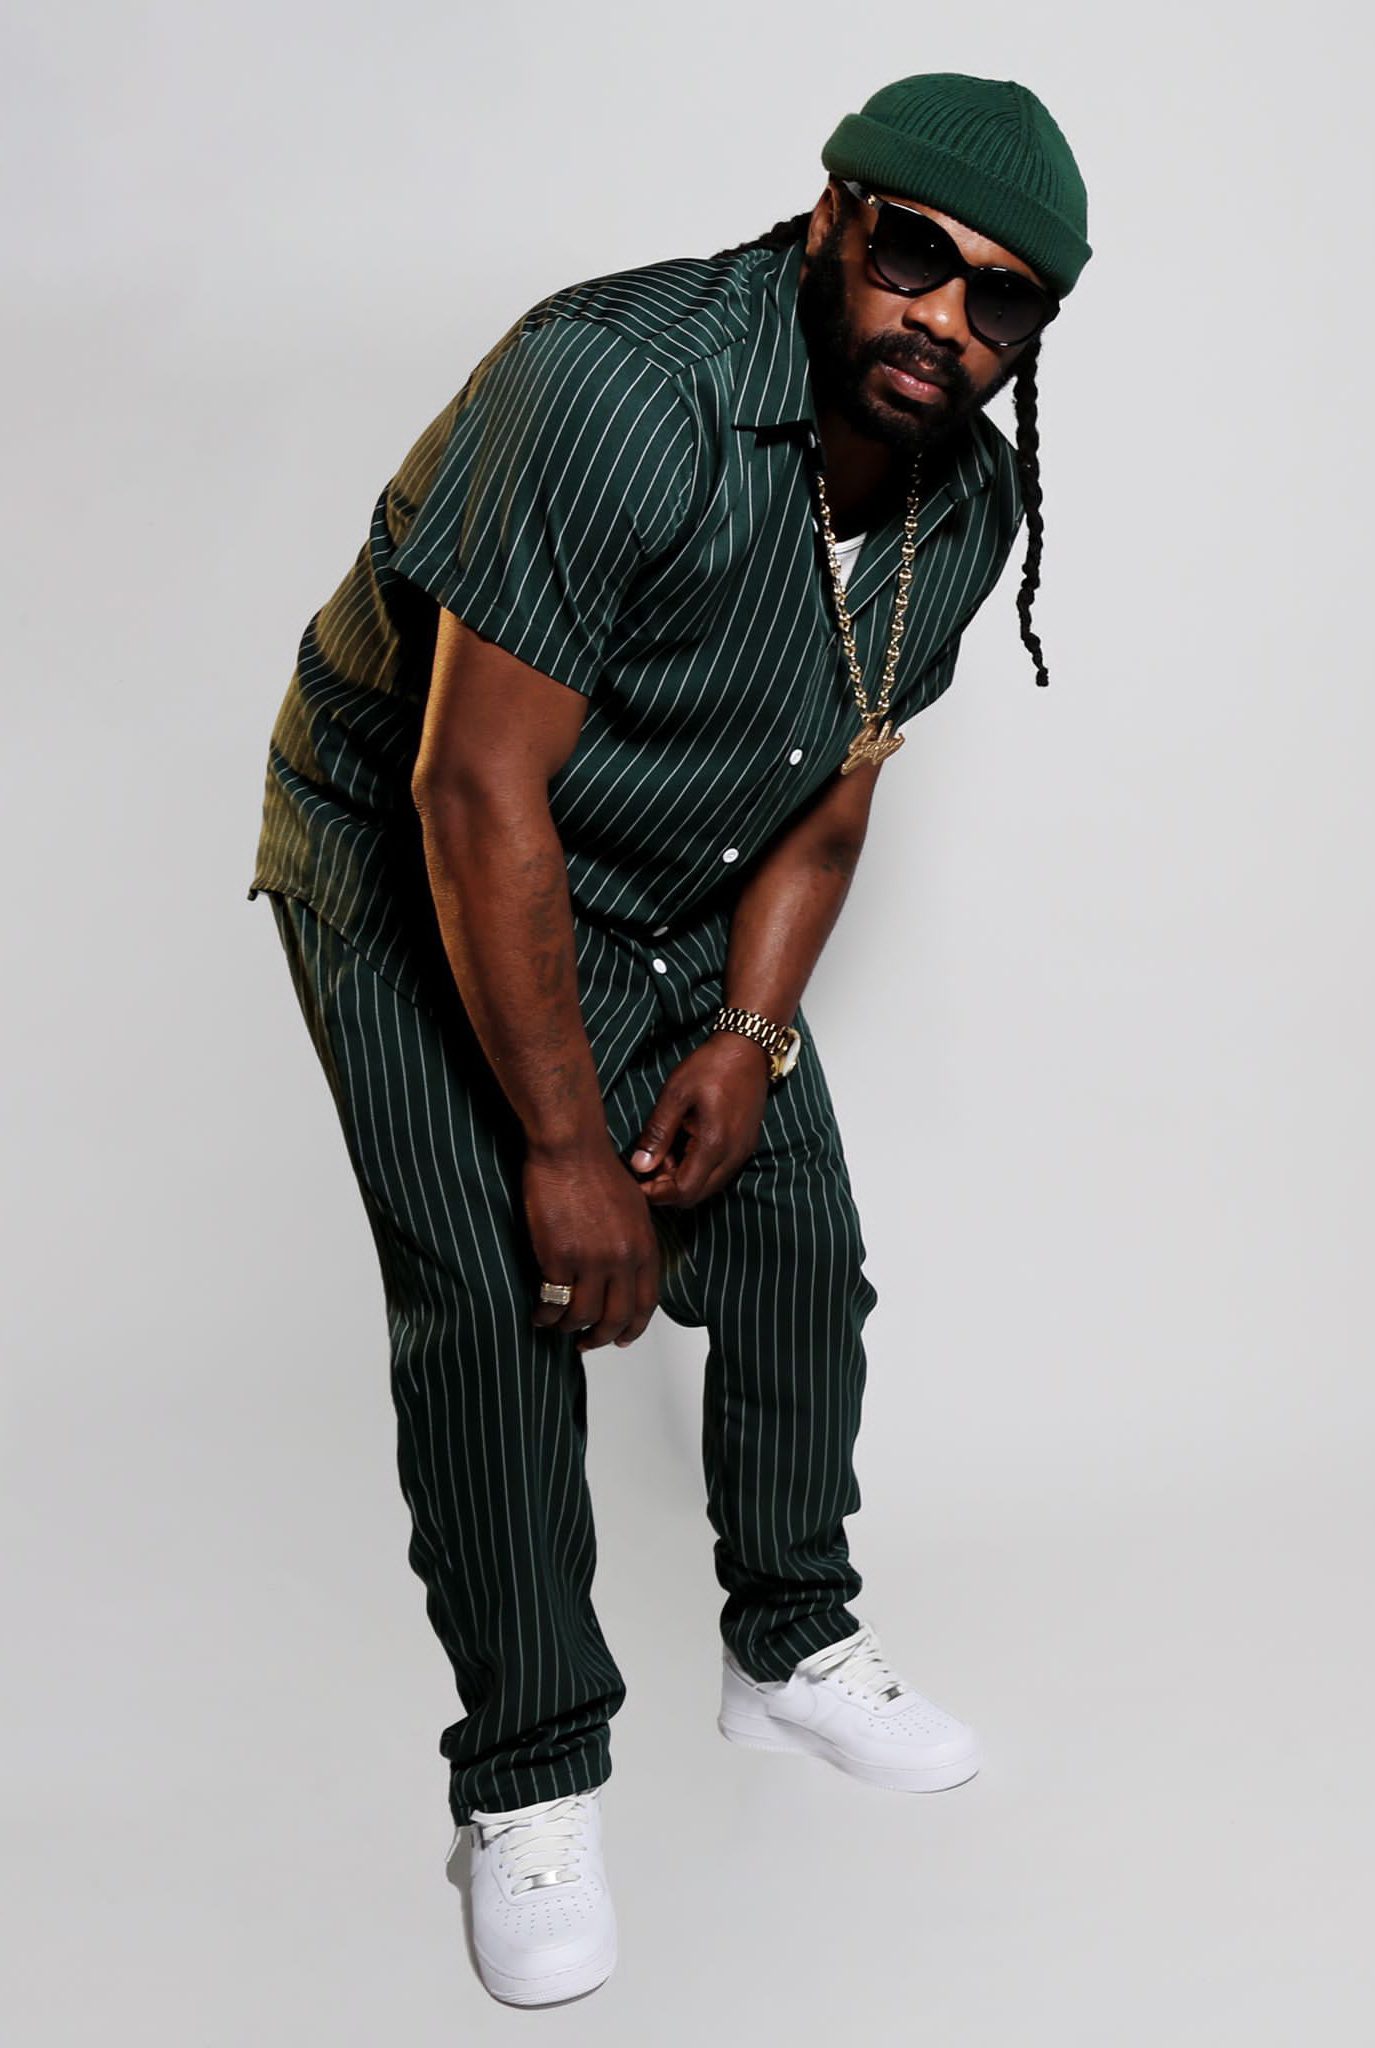 Emerging reggae-and-dancehall star Exco Levi